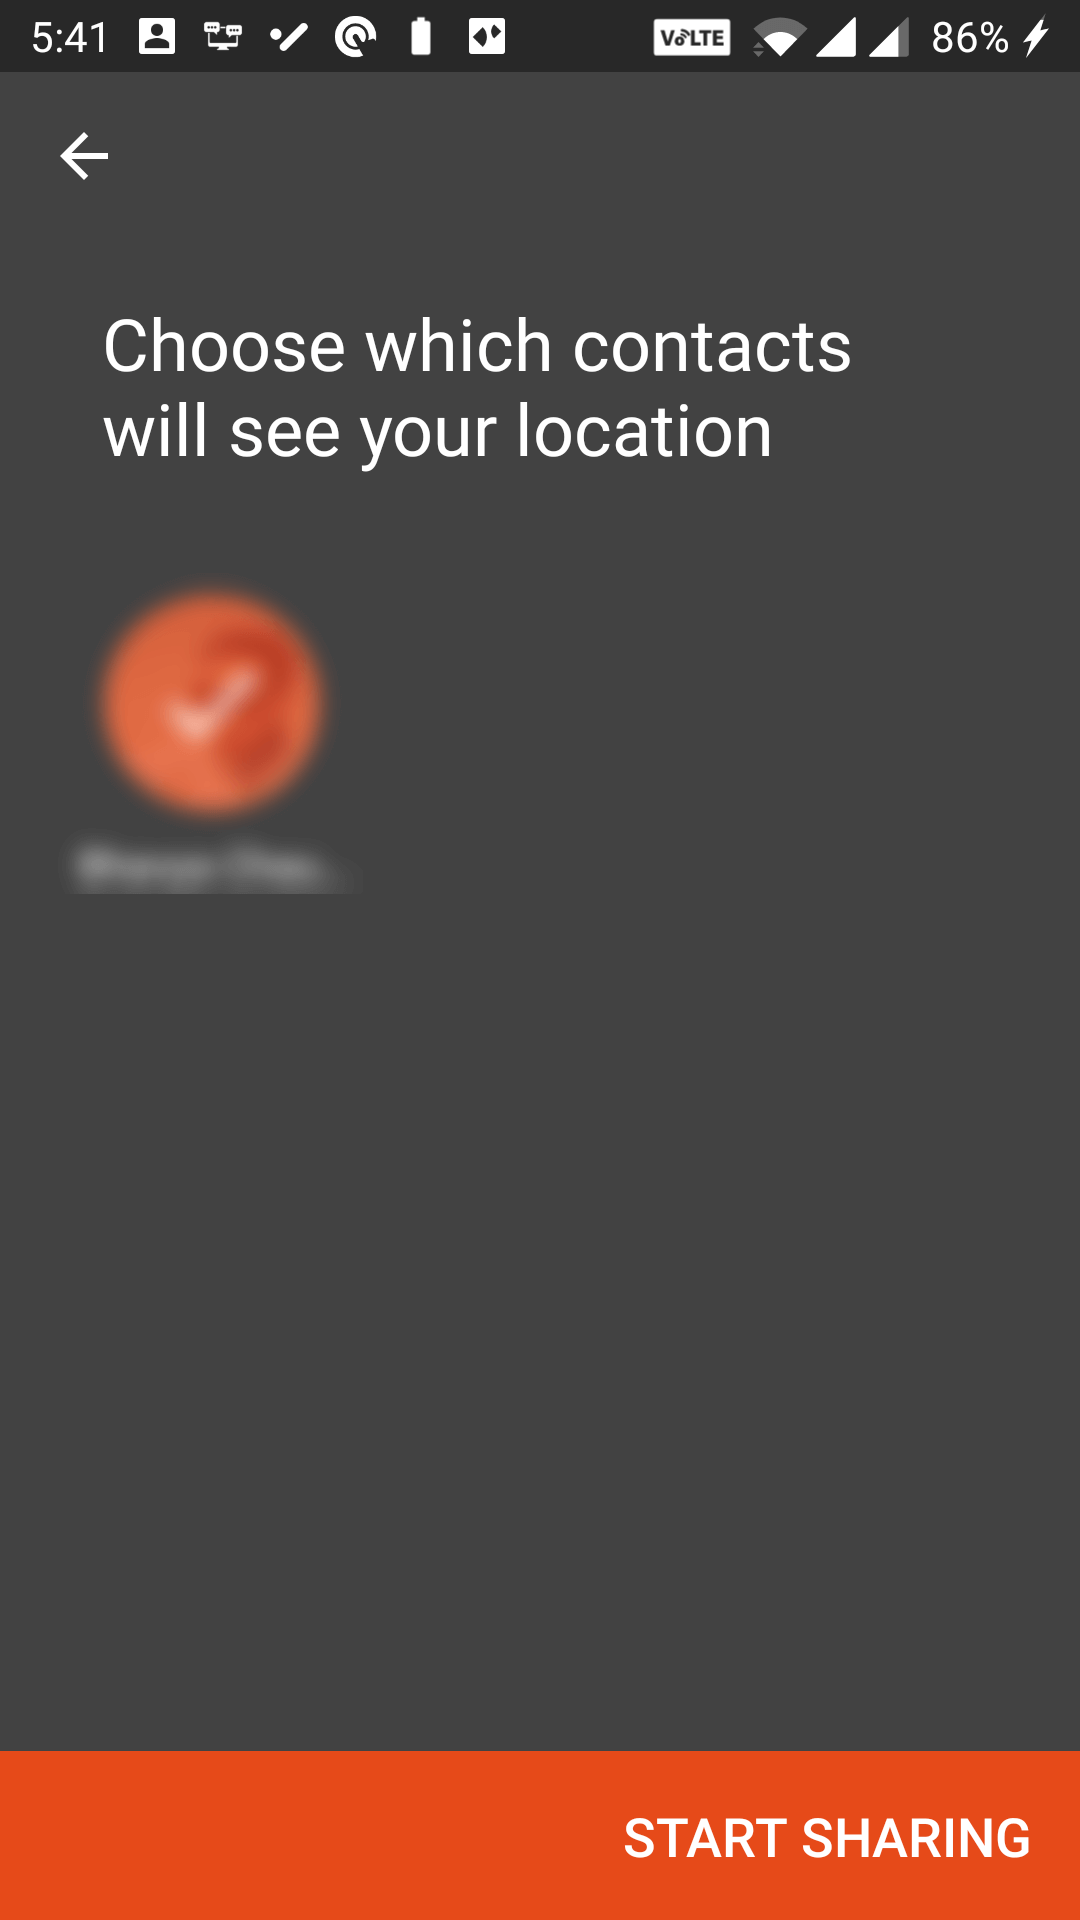 start sharing location with trusted contacts